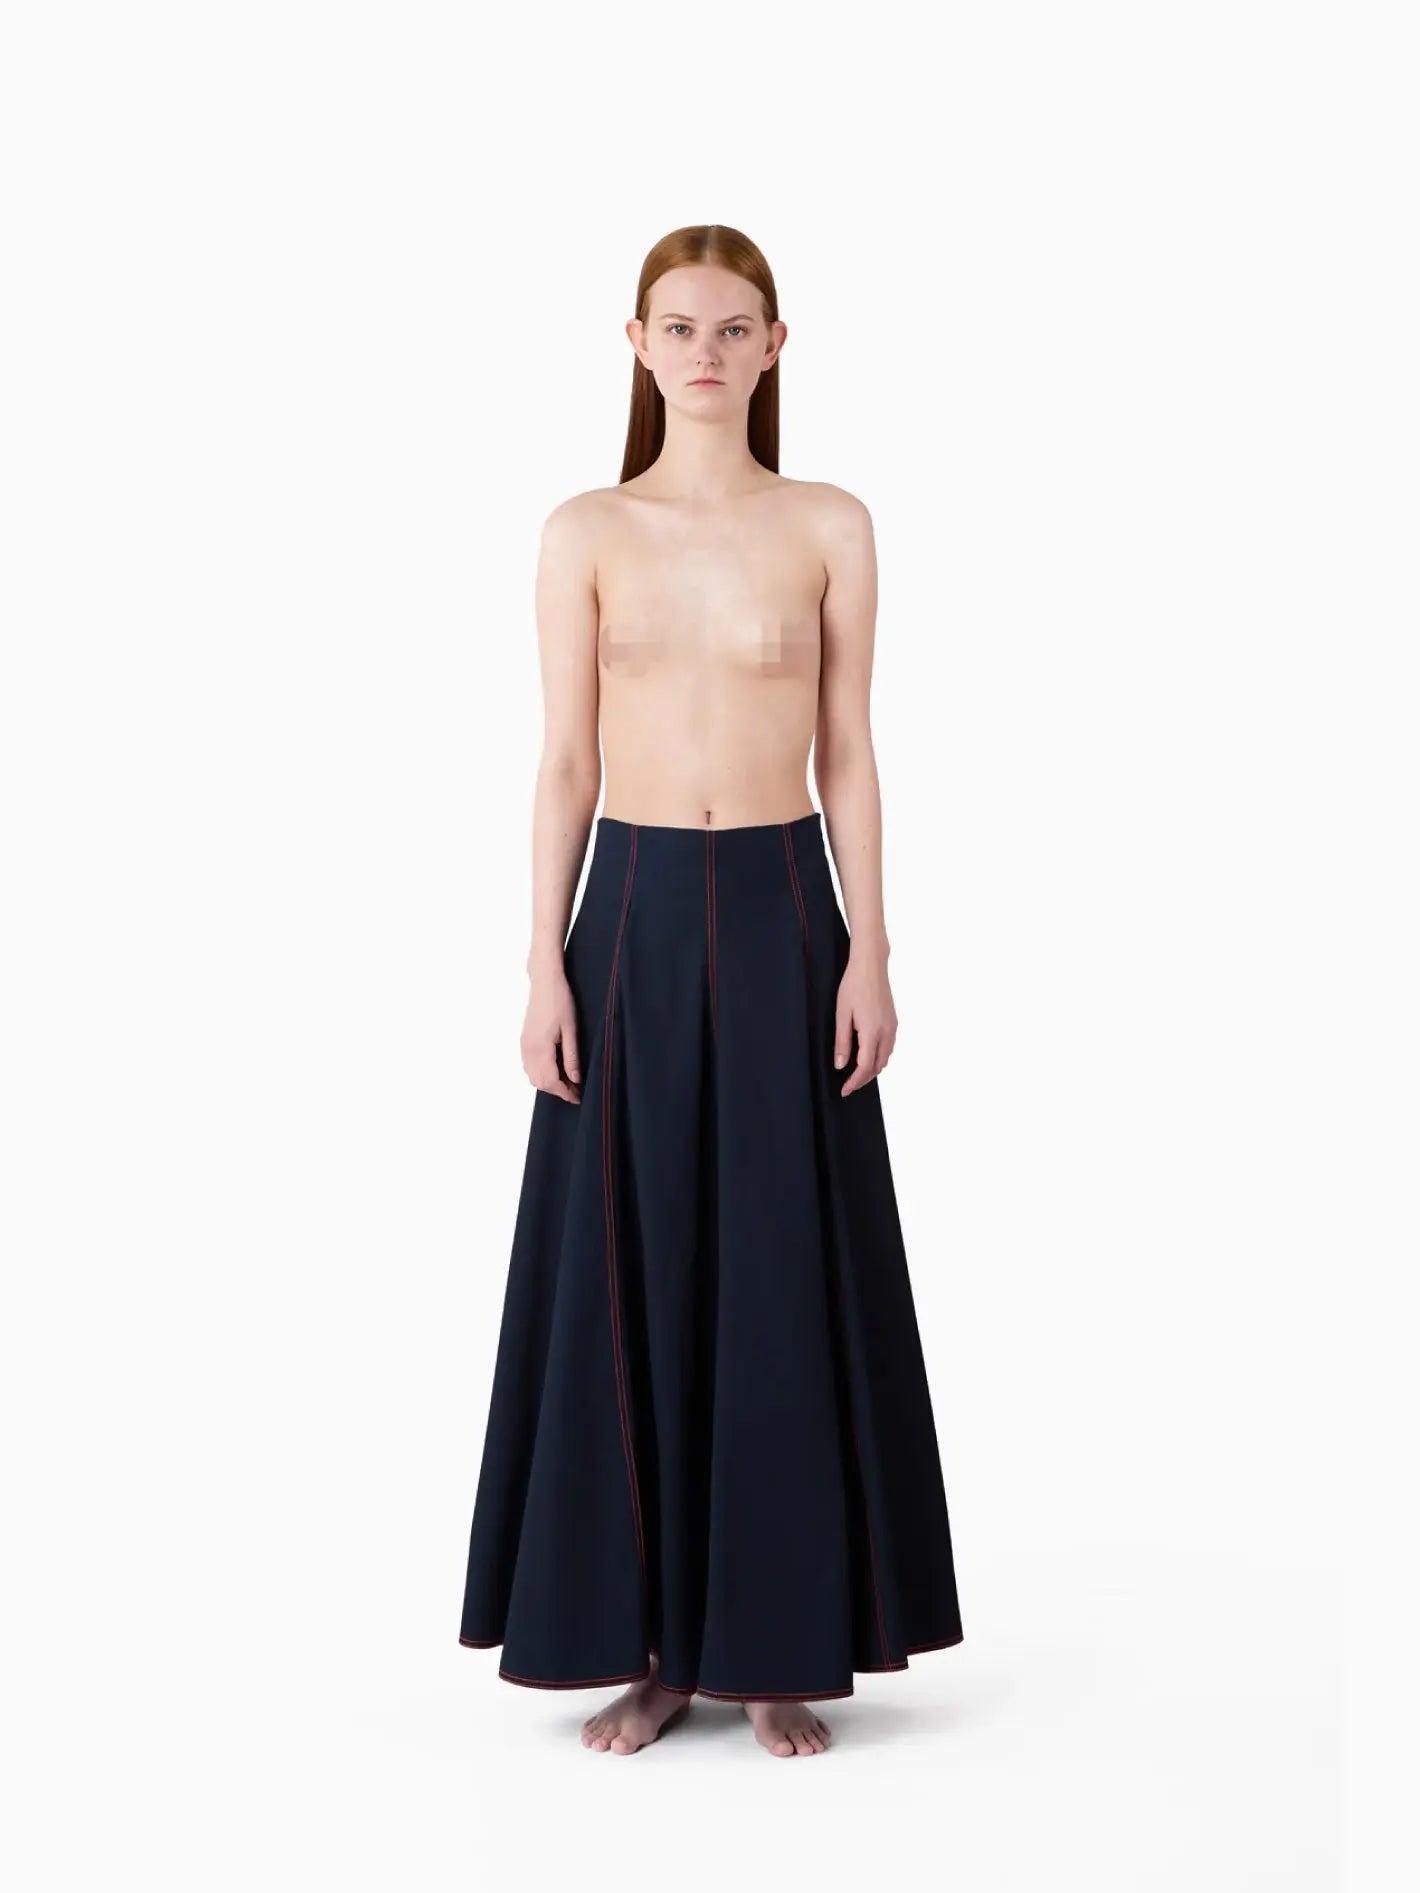 A navy blue Tulipano Skirt Washed Denim with red stitching accents on vertical seams from Sunnei. The skirt flares out slightly with pleats, offering a classic and elegant design. The background is plain white, highlighting the skirt’s details.